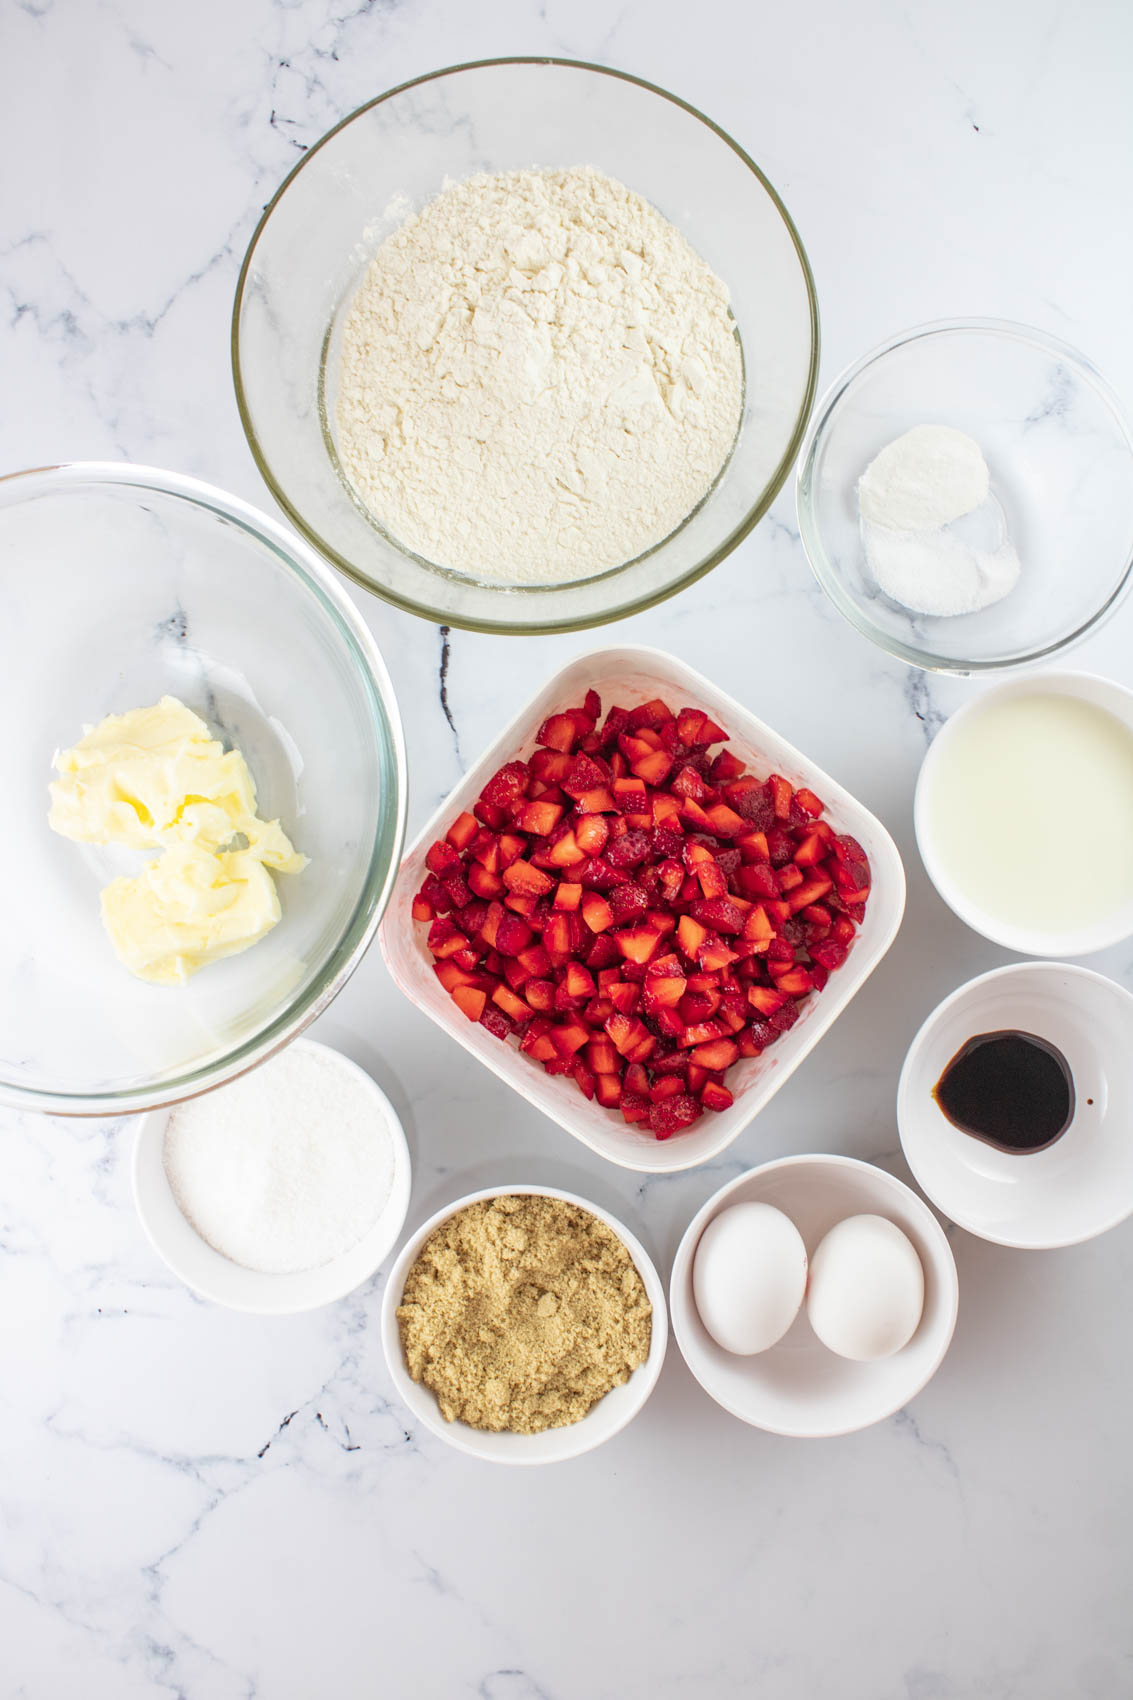 ingredients for strawberry muffins, including fresh strawberries, flour, eggs, butter, brown sugar, powdered sugar